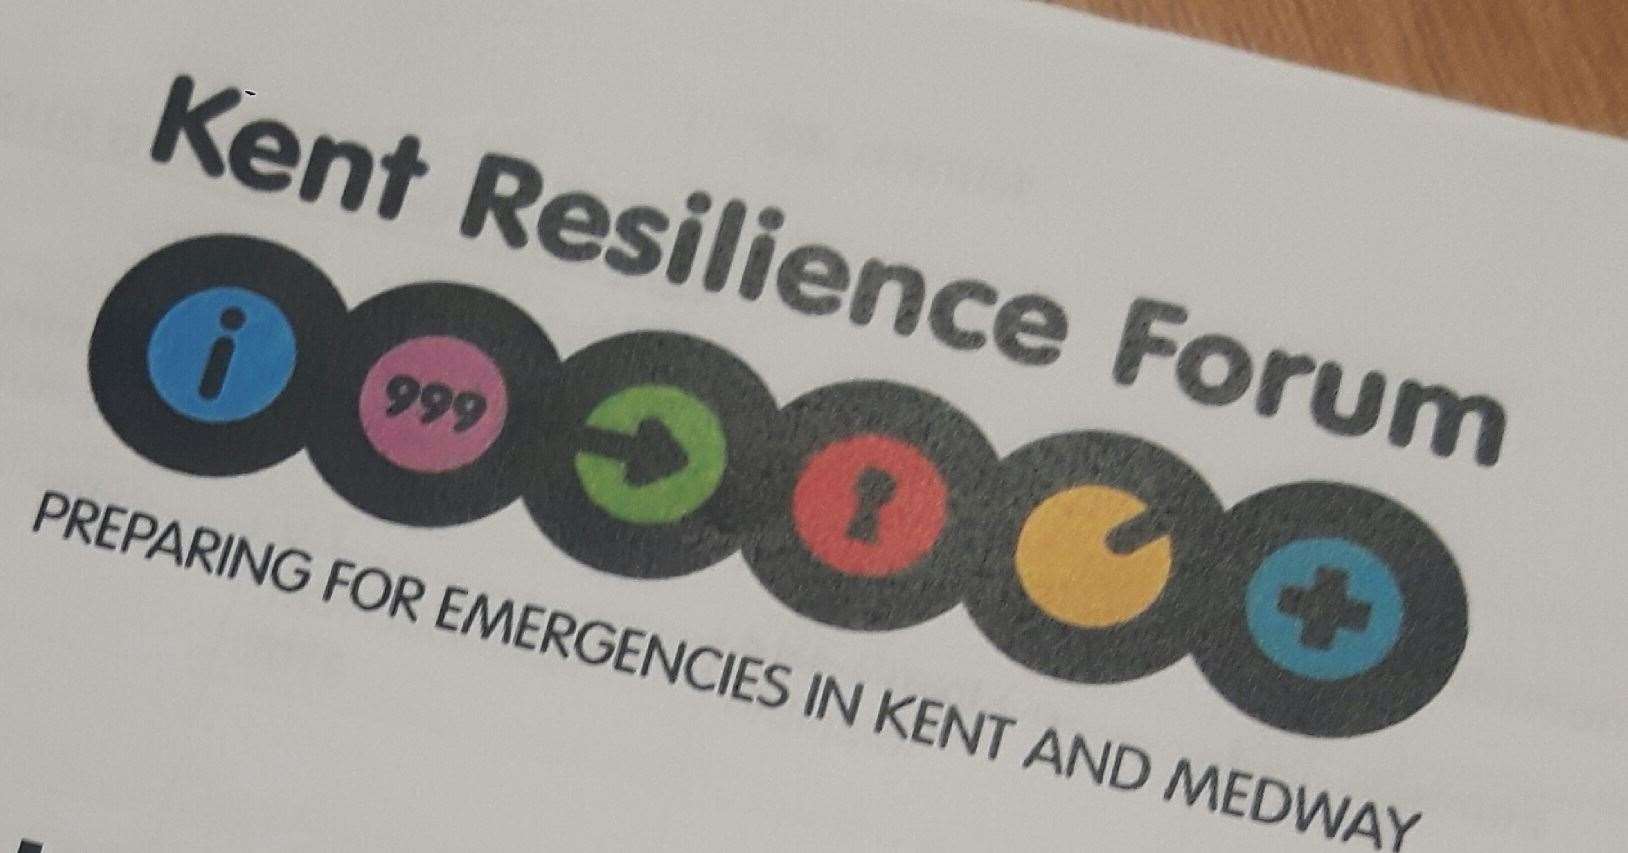 Members of the Kent Resilience Forum have been working on a plan to help the county recover